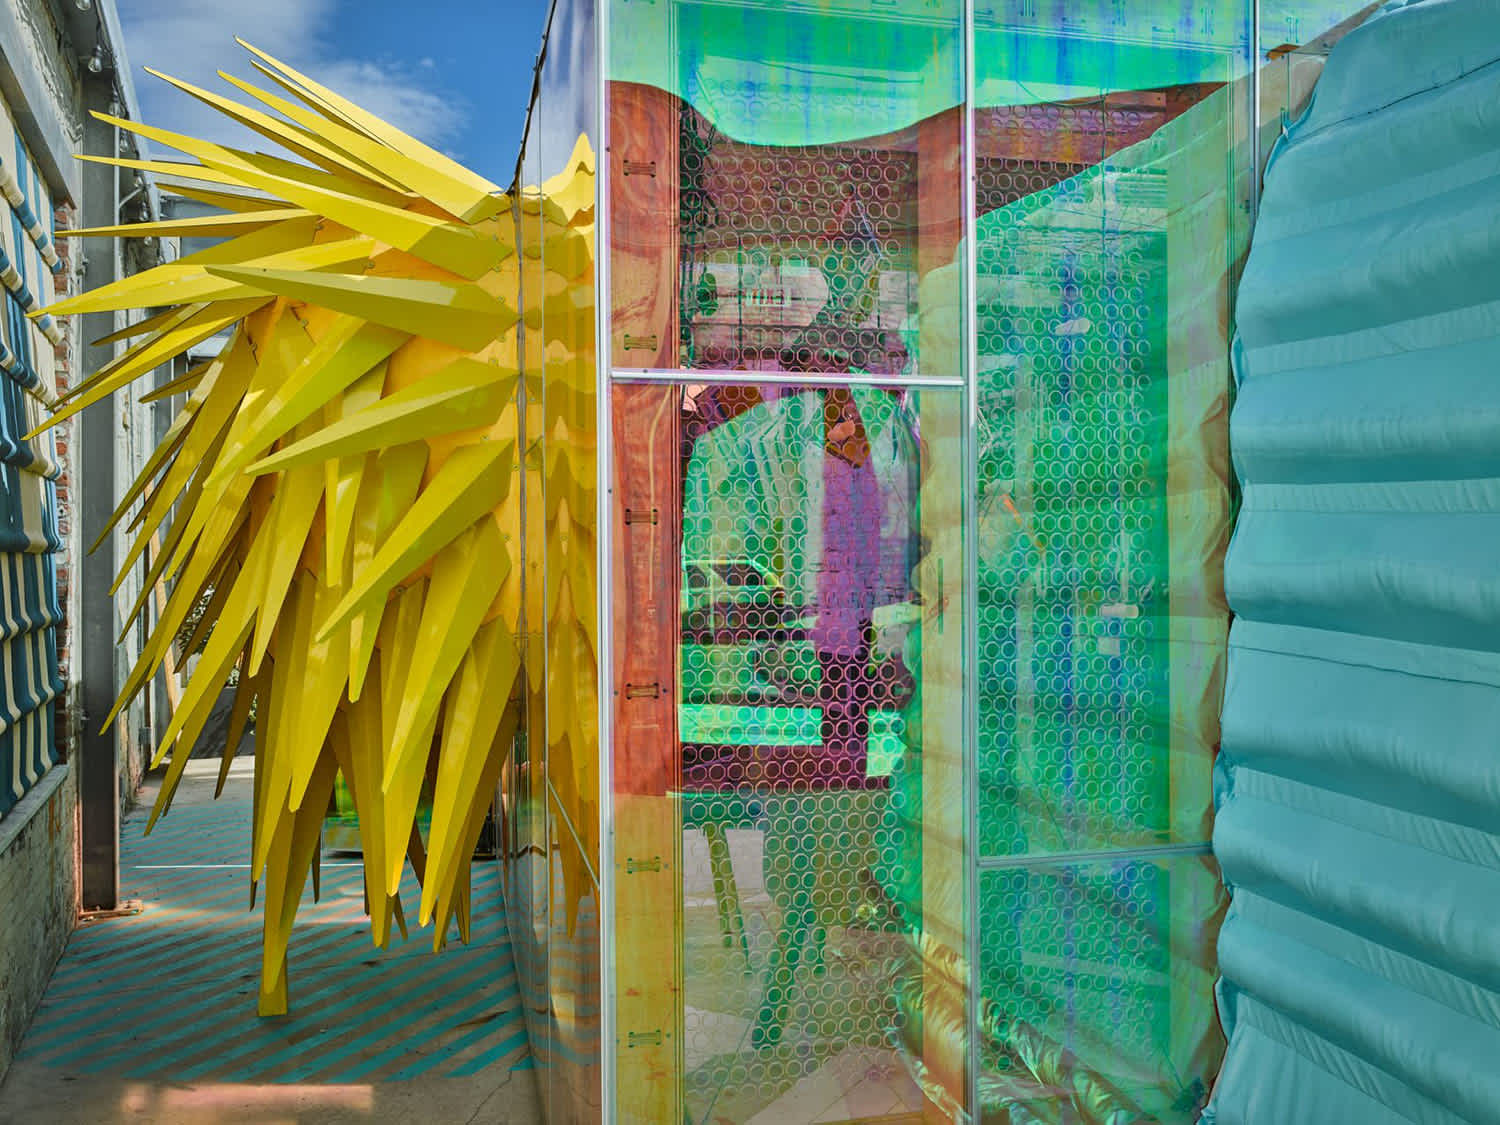 Metal spikes and iridescent glass exterior of the pop up installation Mini Living, designed by Bureau V, located in Brooklyn, NY
